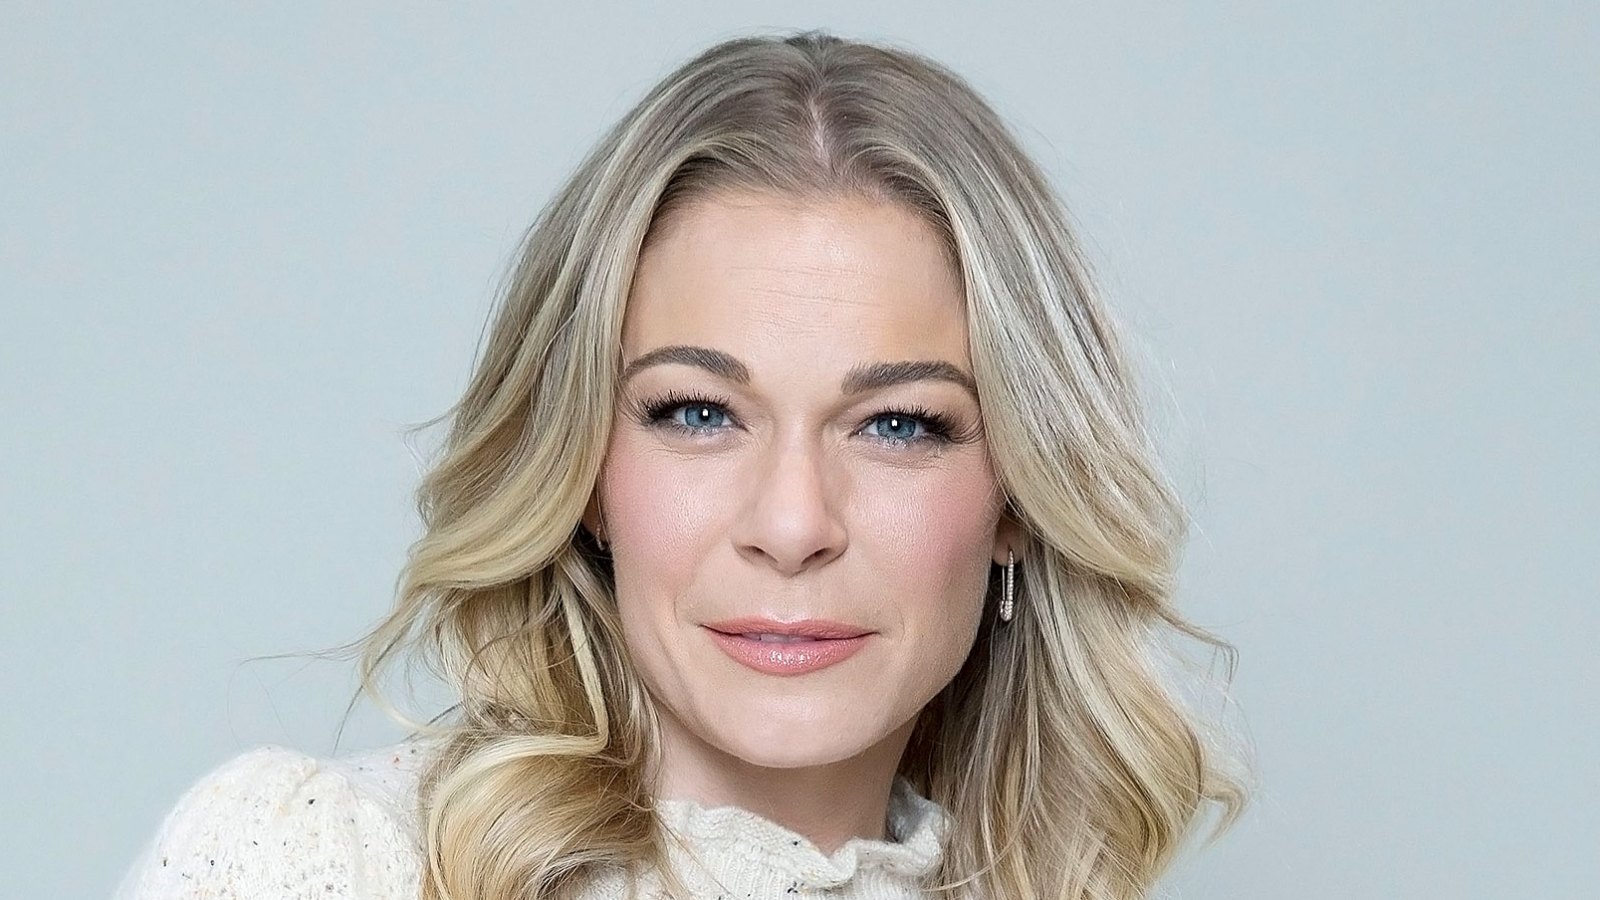 LeAnn Rimes Poses Nude After Psoriasis Returns 1st Time in 16 Years